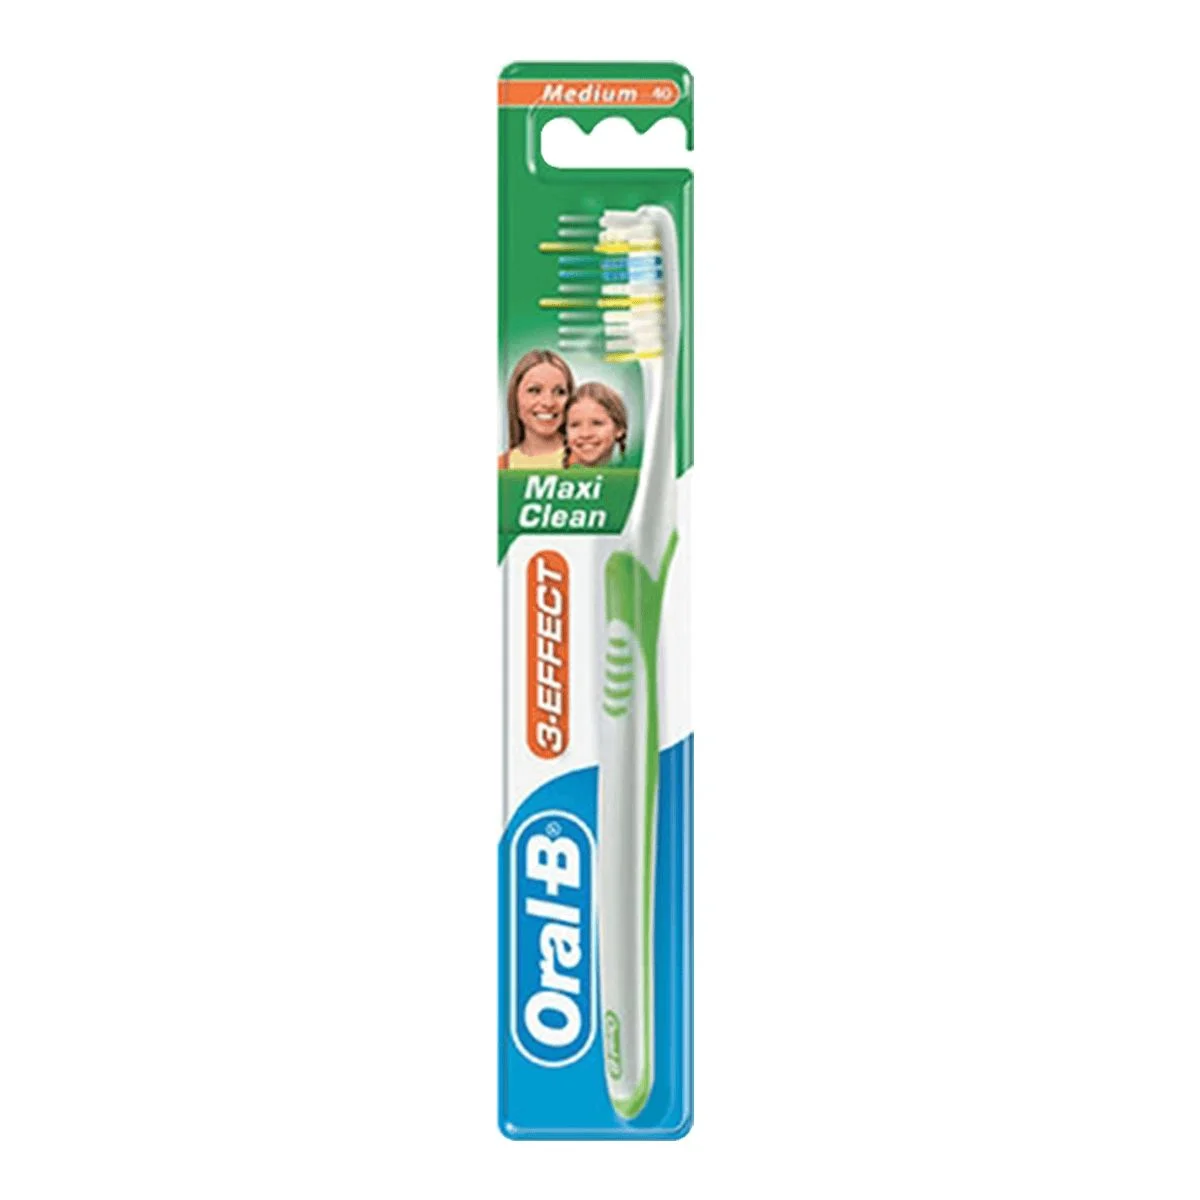 Oral-B 3 Effect Maxi Clean Manual Toothbrush undefined